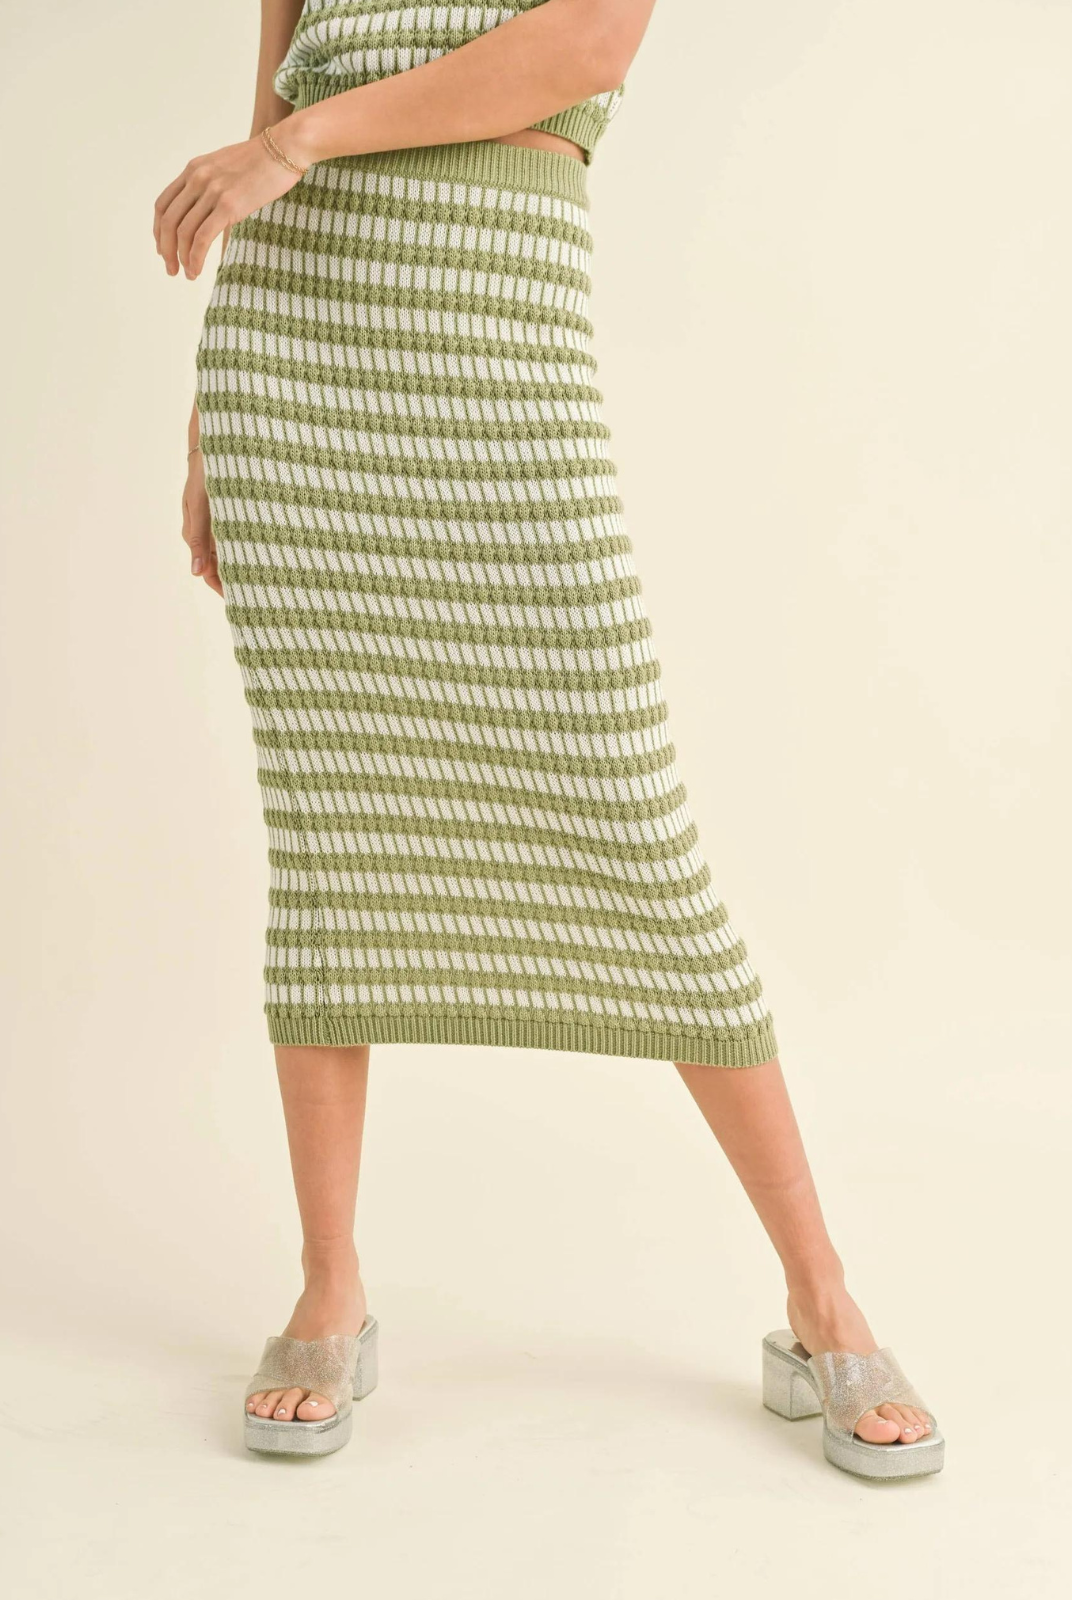 Get the ultimate cozy and stylish look with our Lili Knit Skirt! The stretch fit guarantees a comfortable and flattering fit, while the mixed color pattern adds a unique touch. Plus, don't forget to pair it with our matching top for a complete set!